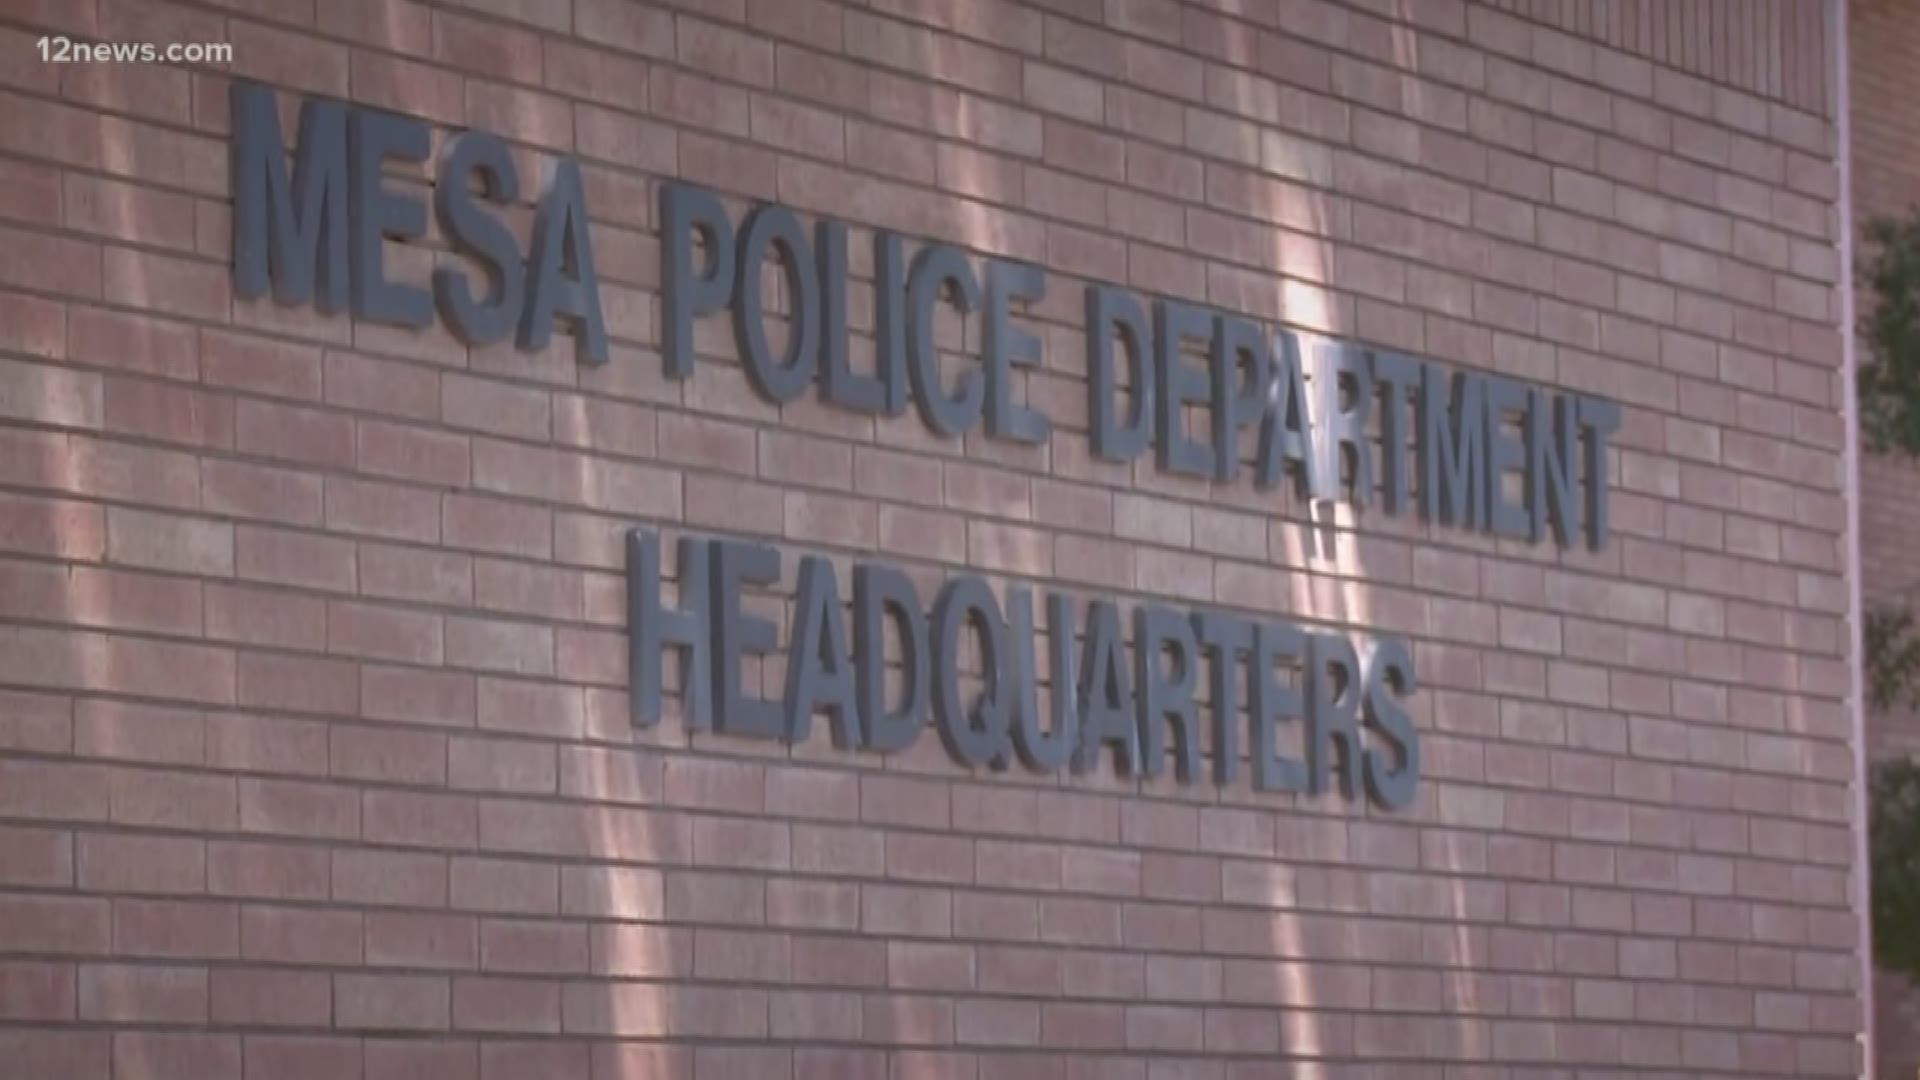 Six female Mesa police officers are ready to sue the department over disturbing claims of sexual harassment by a supervisor. The women say they received lued text messages, even a sexually explicit drawing of three of the women, from Sergeant Jeffery Neese. Neese still works for Mesa PD.